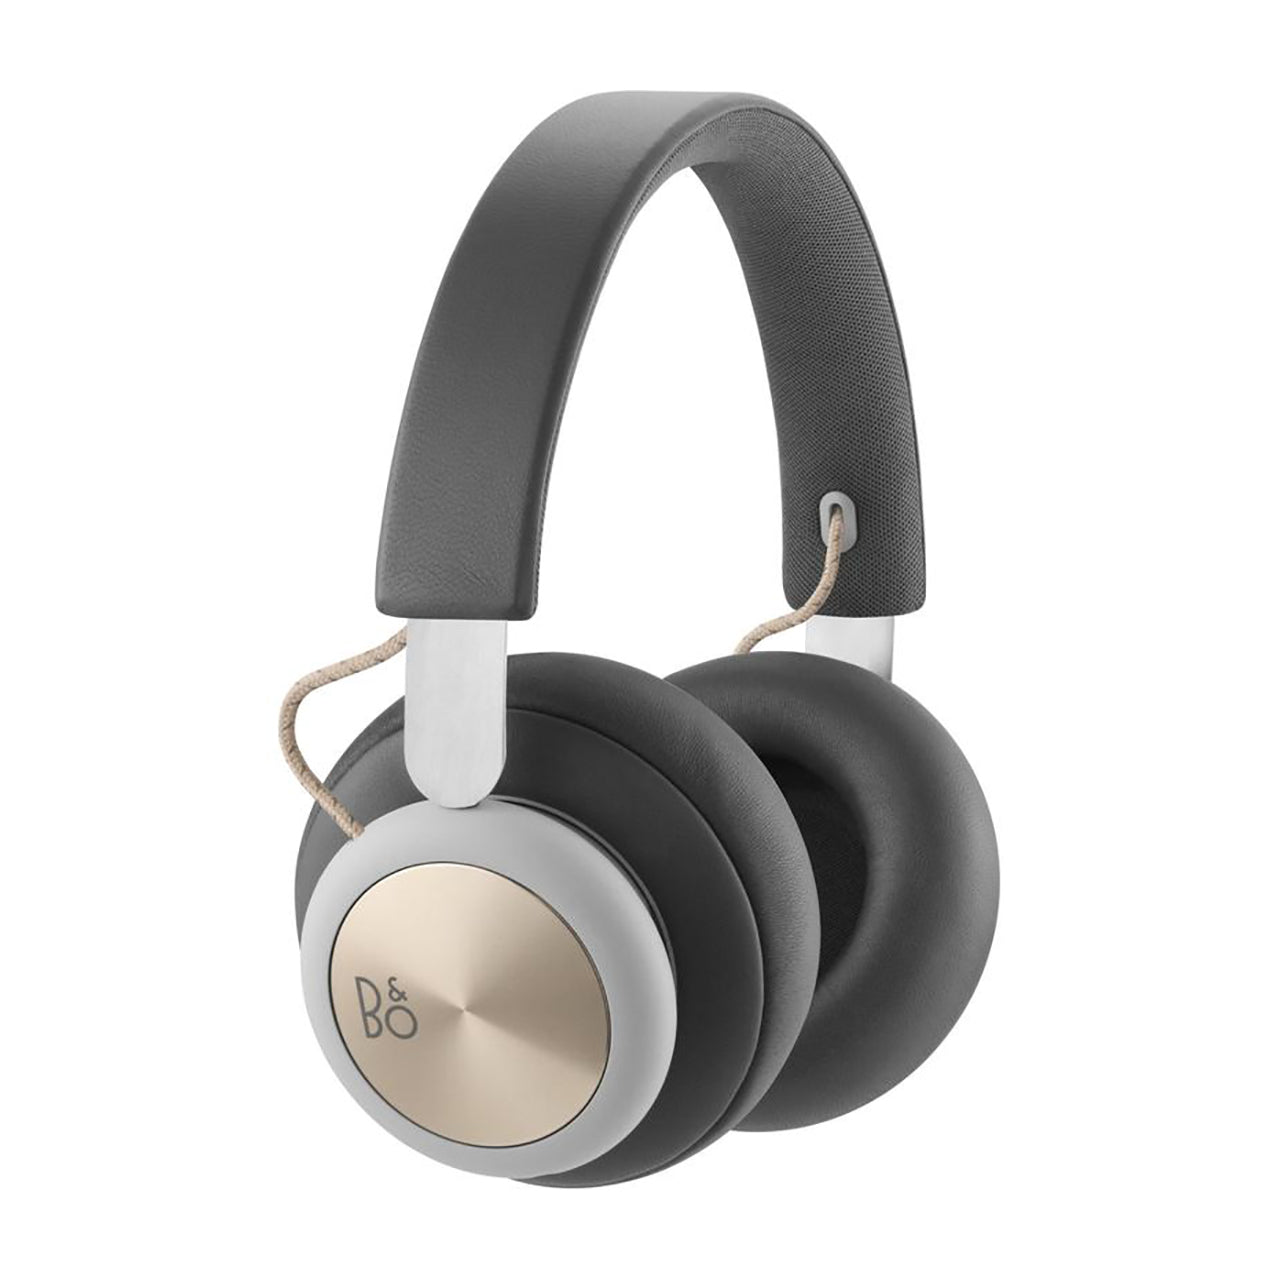 Bang & Olufsen BeoPlay H4 Wireless Over-Ear Headphones - Charcoal Grey